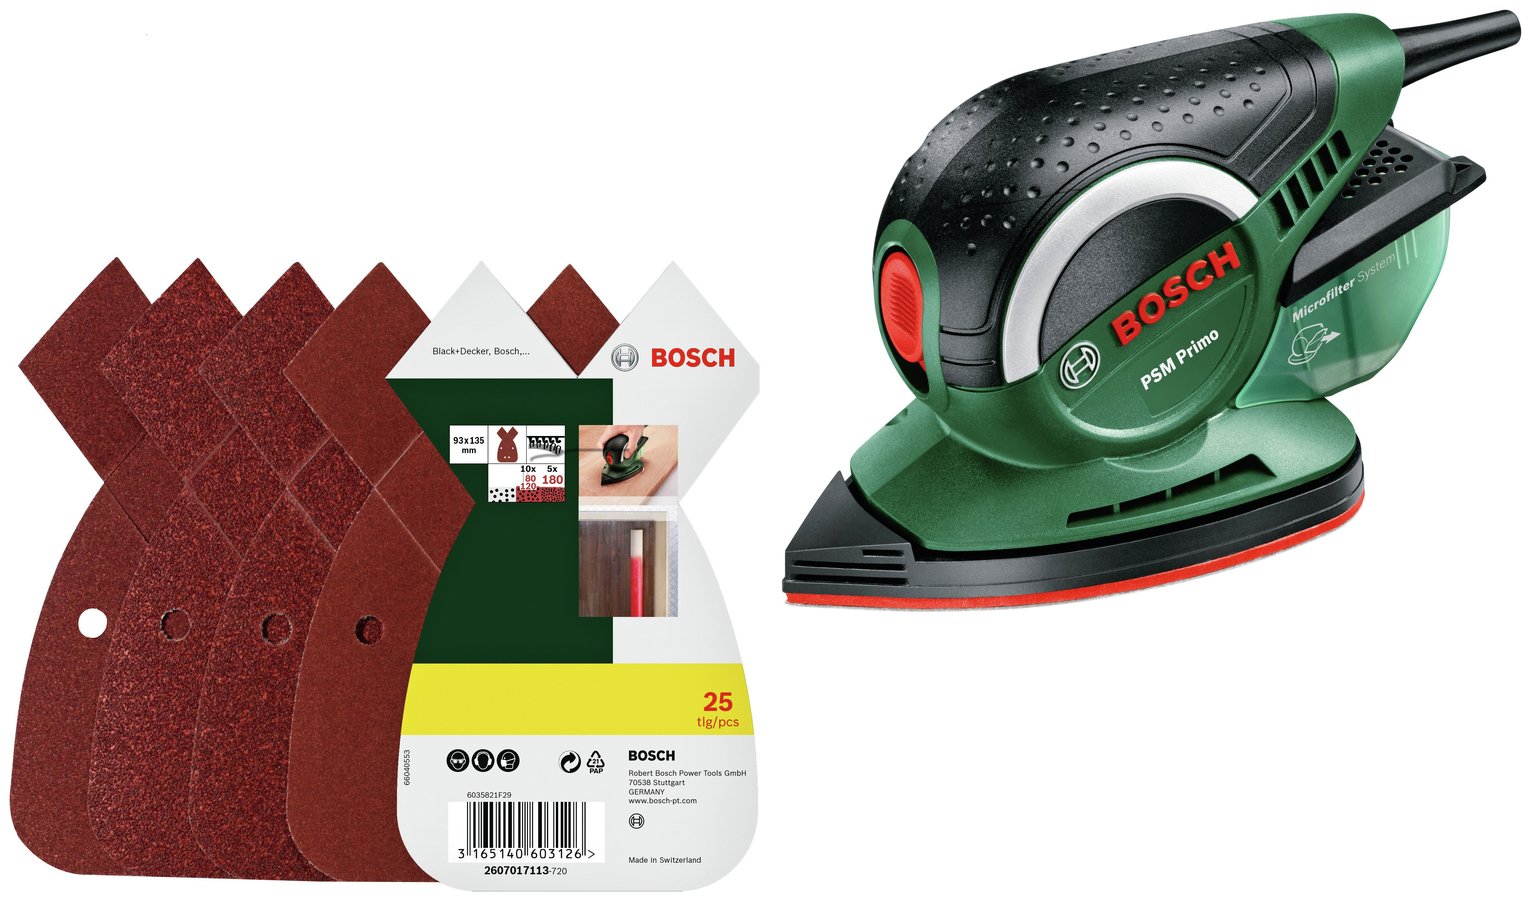 Review of Bosch PSM Primo Detail Sander with 25 Sheets